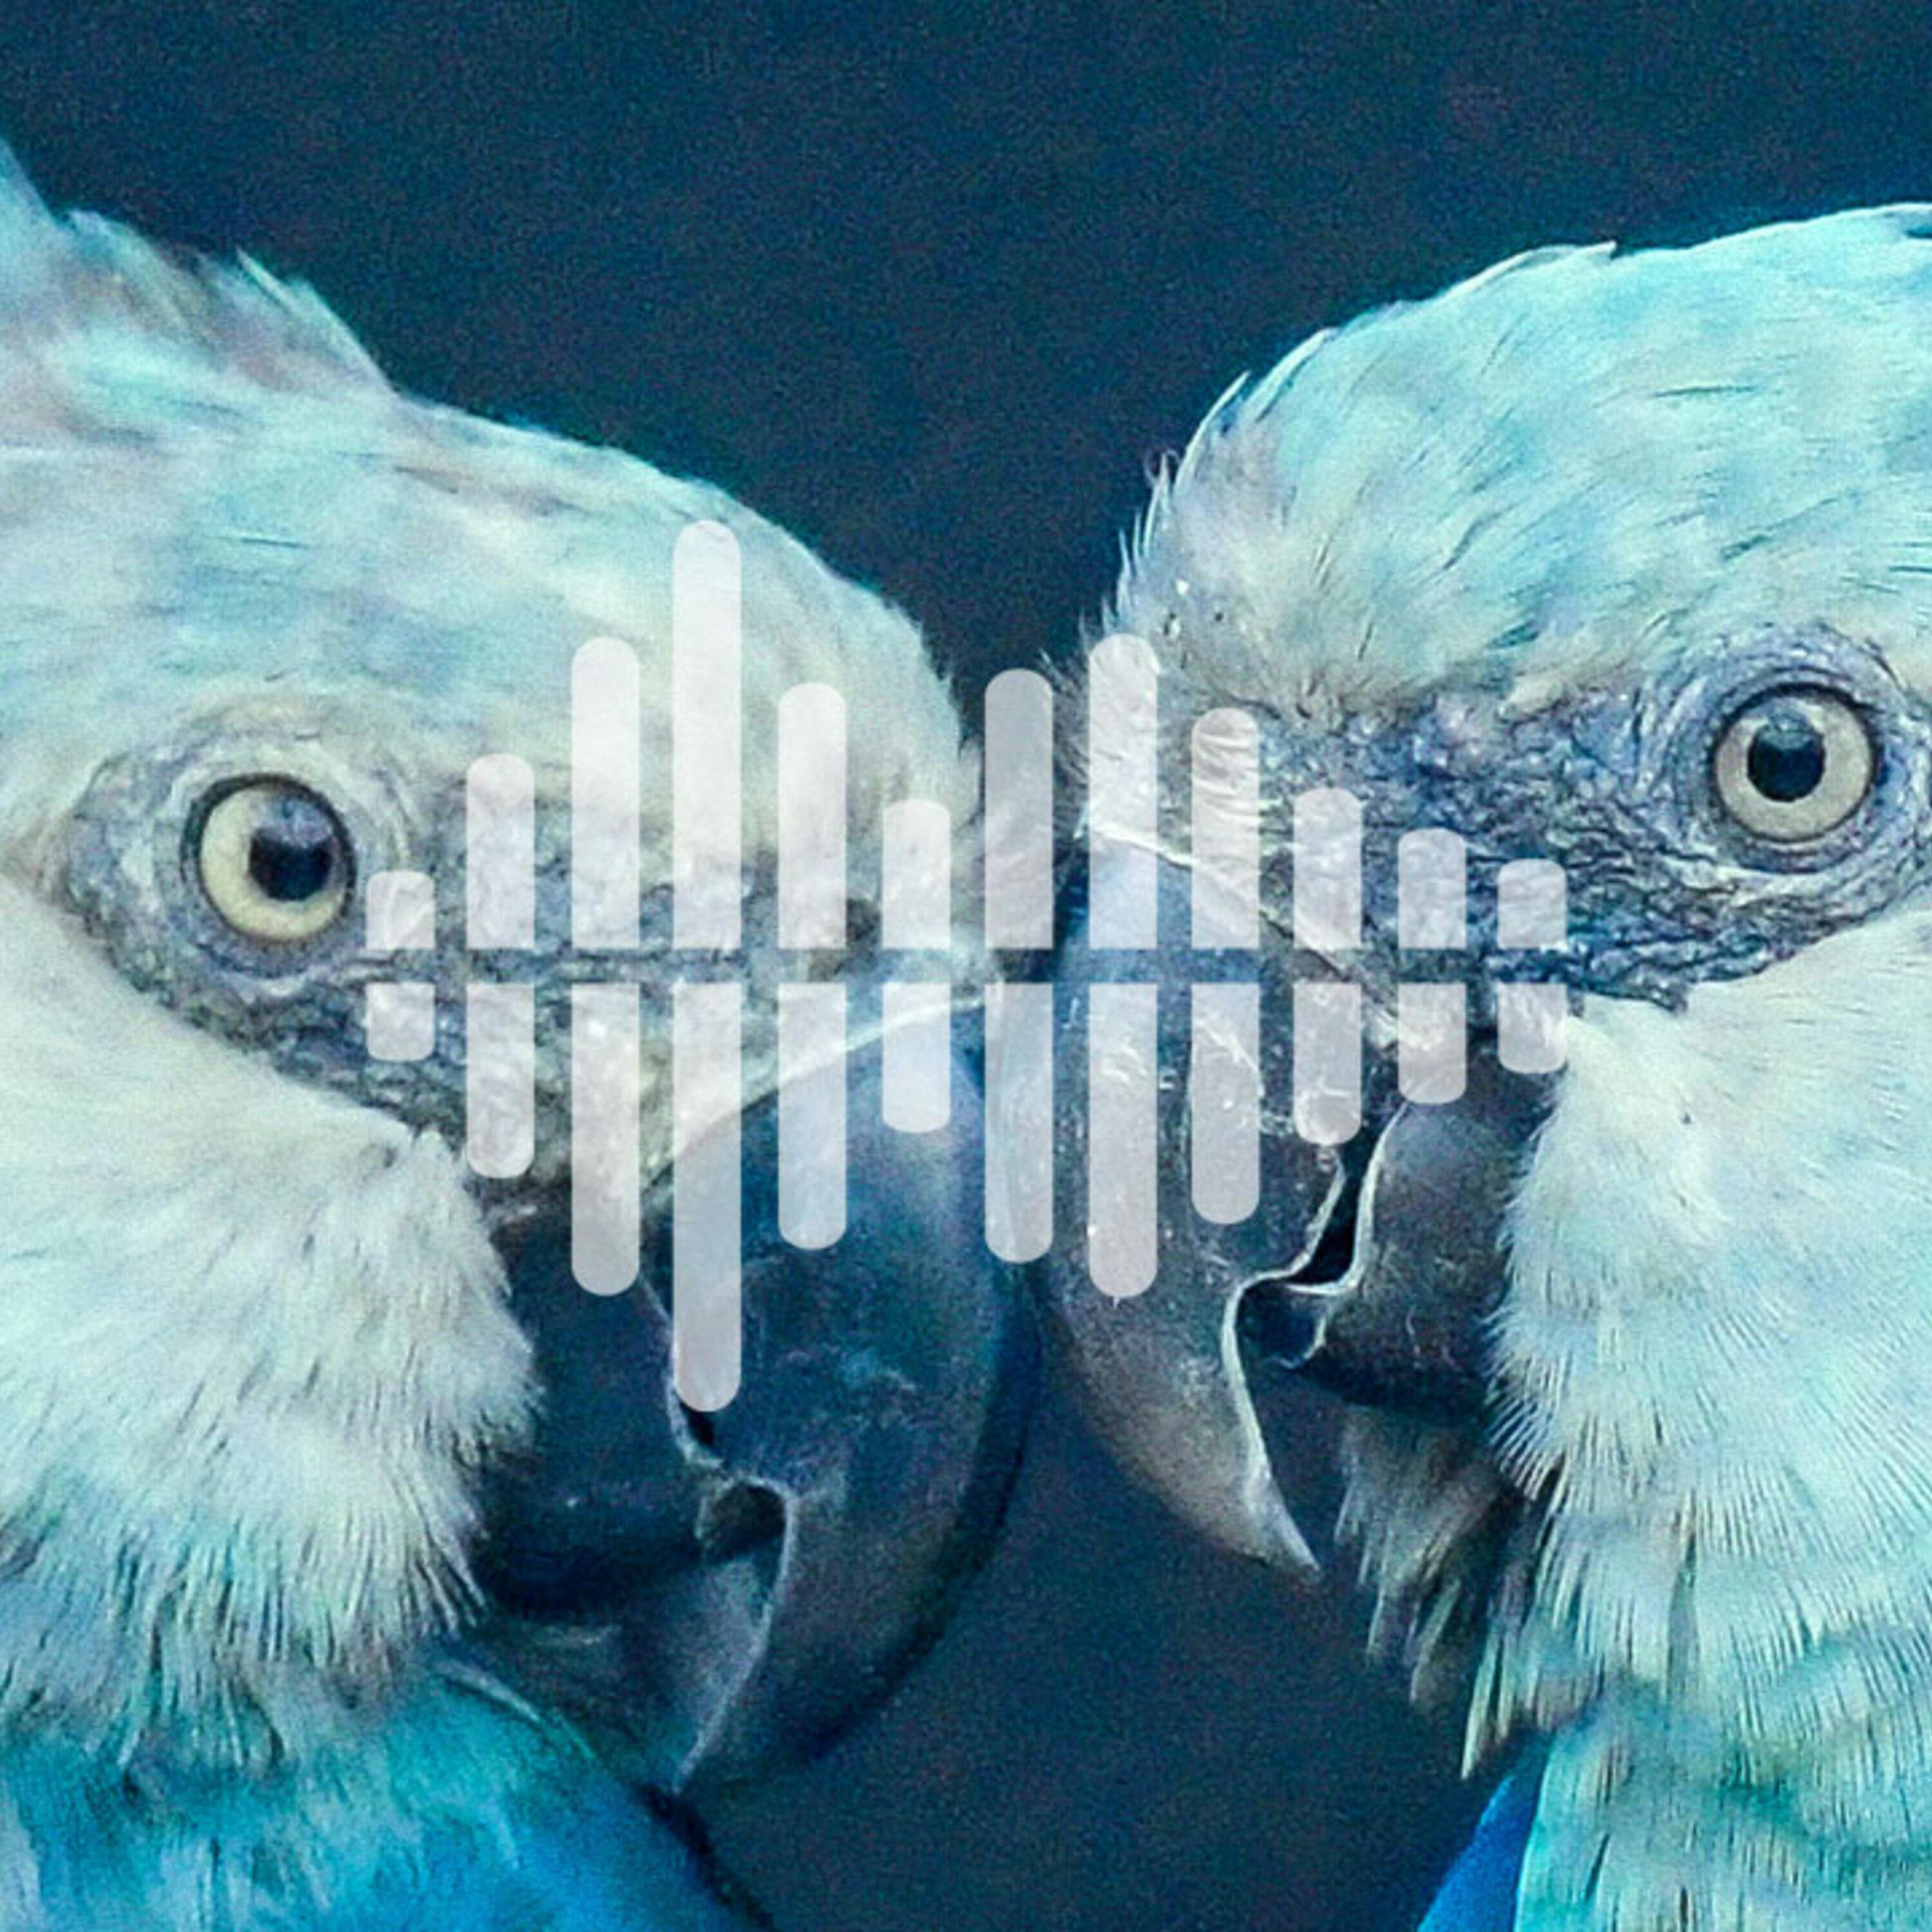 Saving the Spix’s macaw, and protecting the energy grid